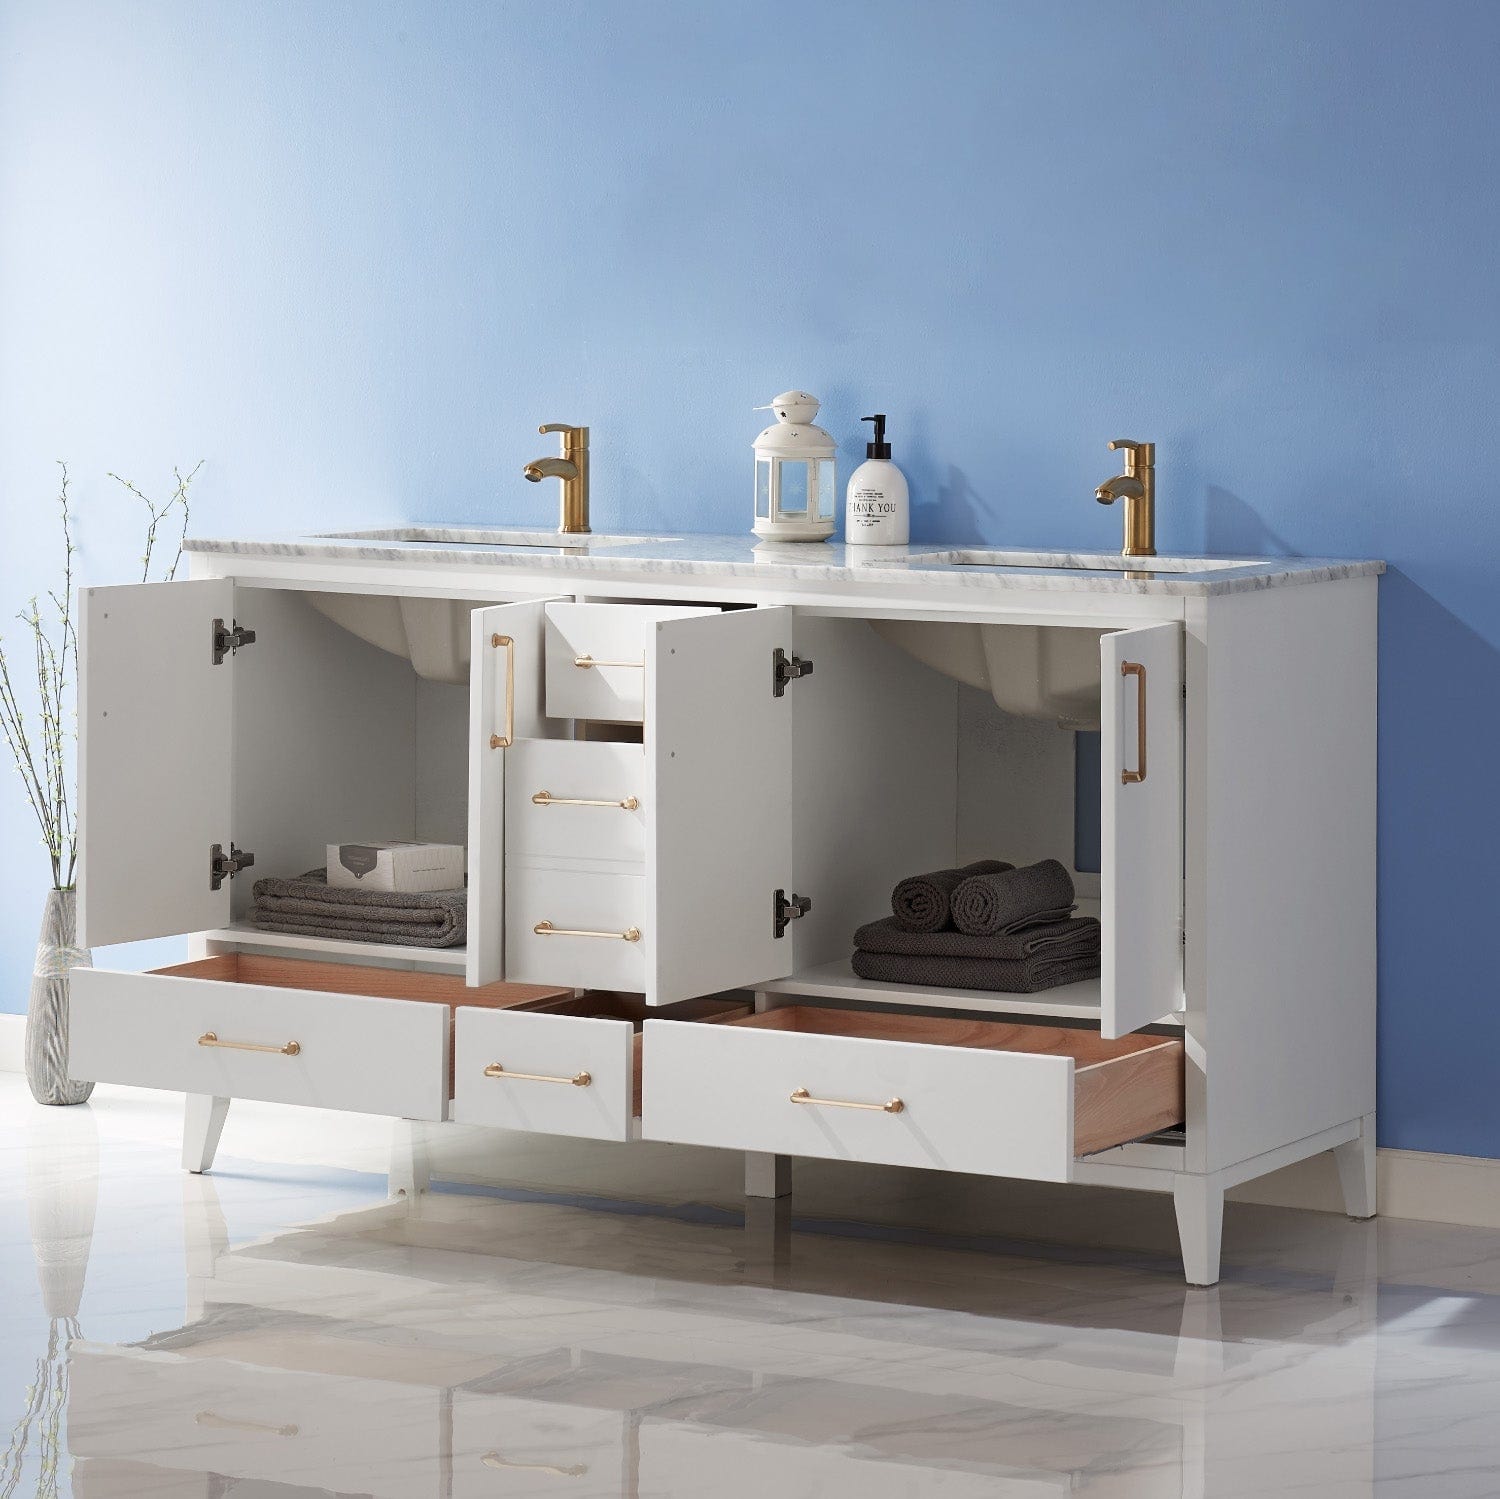 Altair Sutton 60" Double Bathroom Vanity Set in White and Carrara White Marble Countertop without Mirror 541060-WH-CA-NM - Molaix631112971980Vanity541060-WH-CA-NM